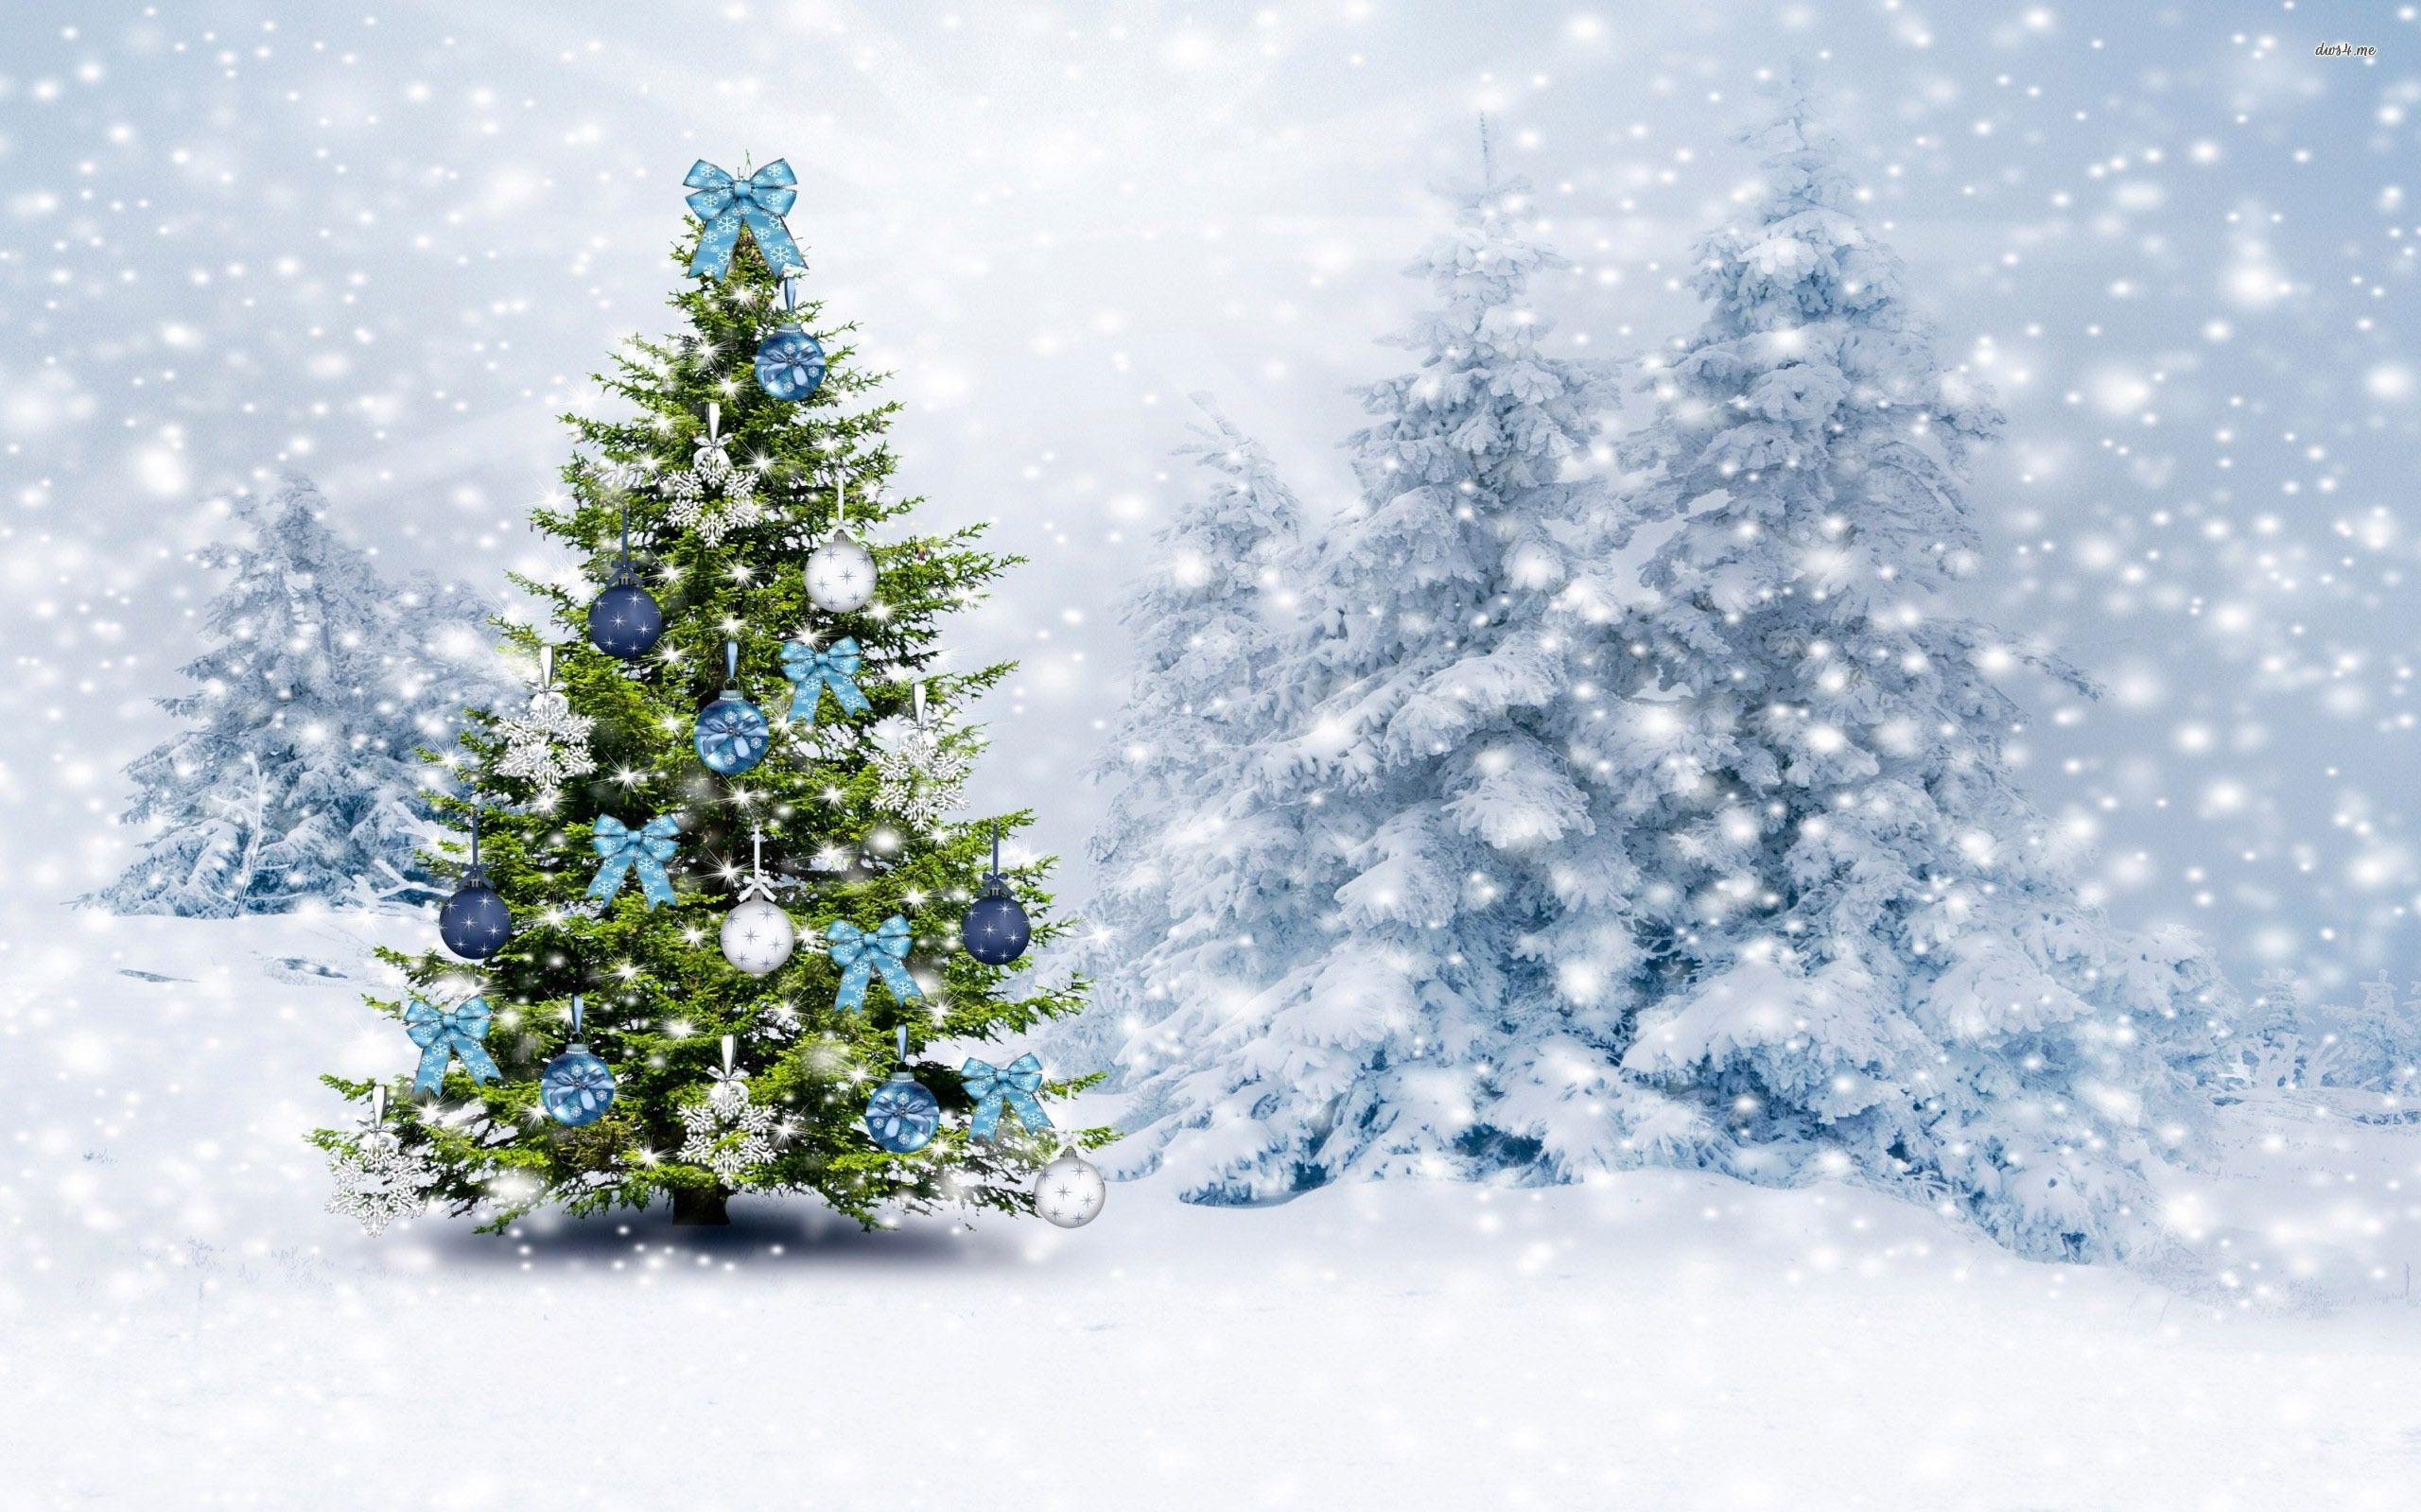 Christmas Tree In The Snowy Forest HD Wallpaper